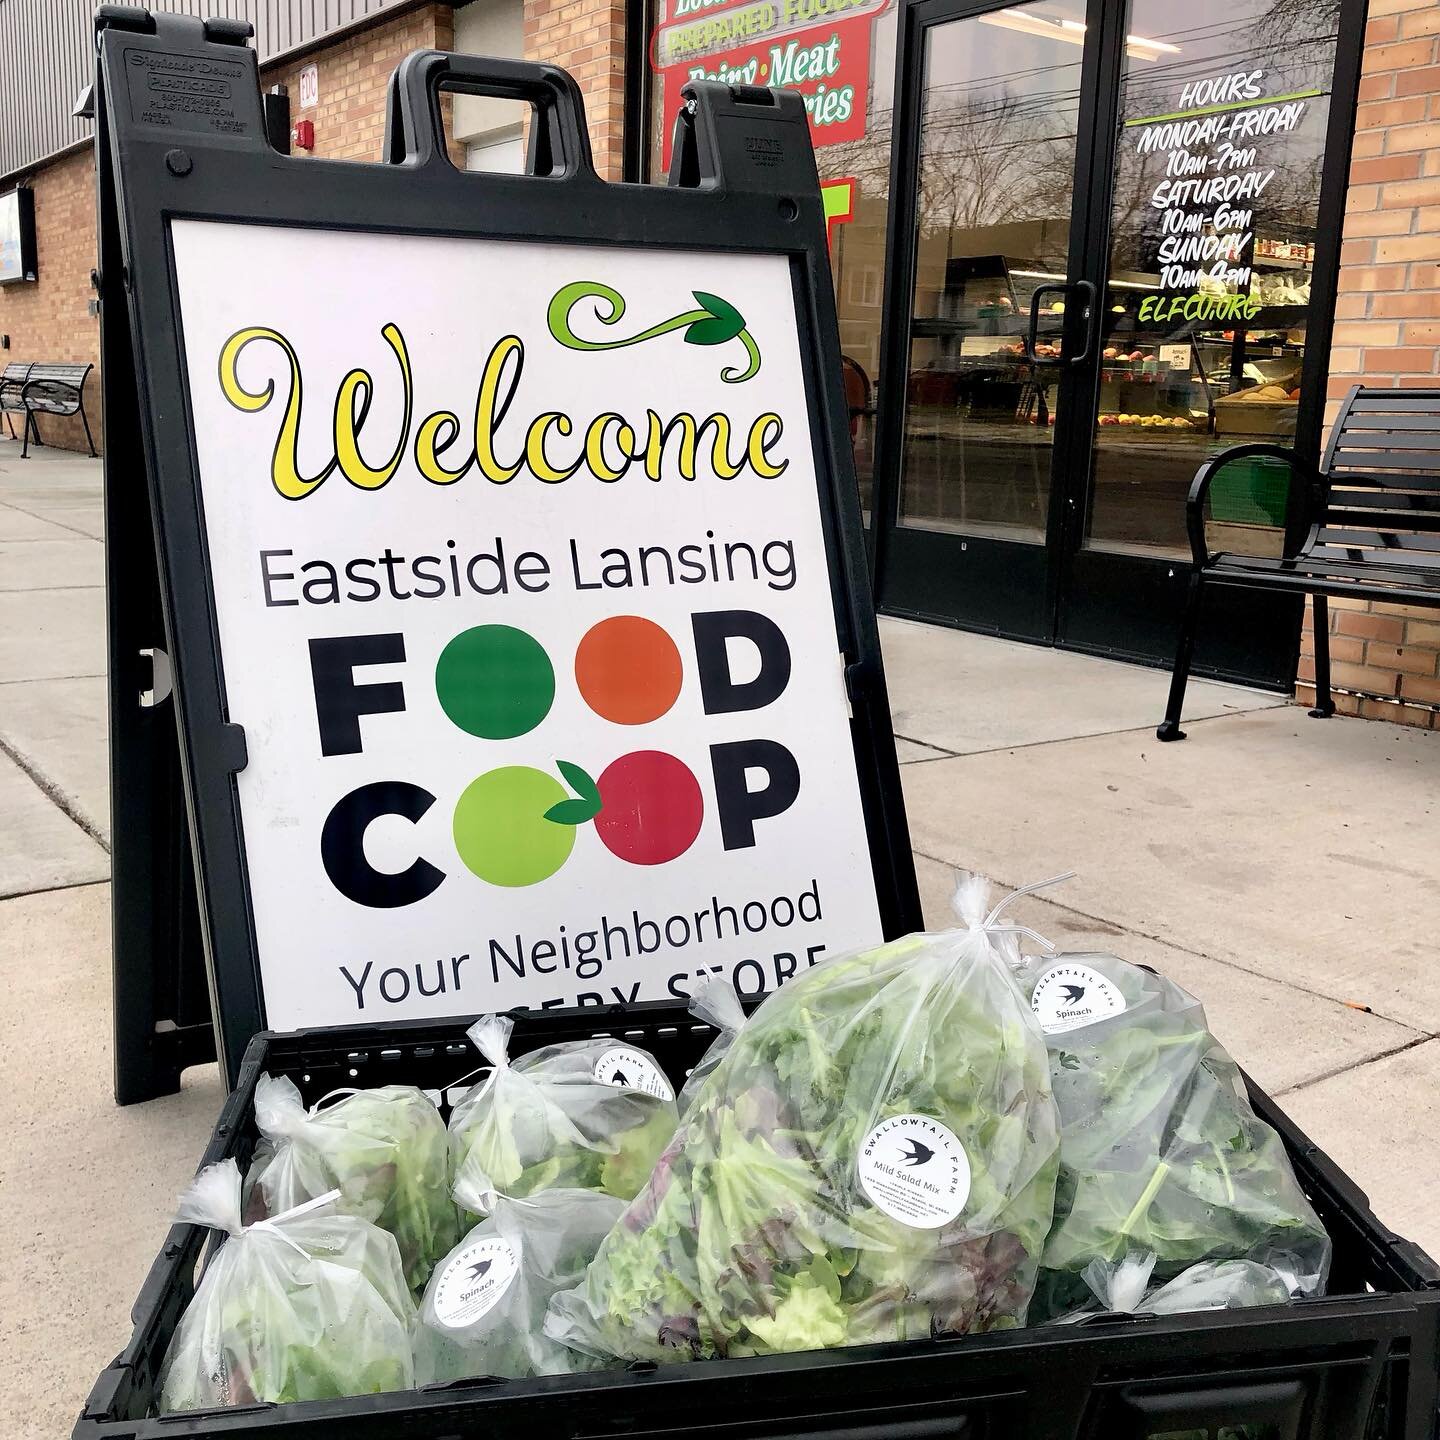 We just dropped off our final greens of the year at ELFCO @eastside_lansingfoodcoop If you need some salad for your Christmas table, stop on by.

If you&rsquo;re not familiar with @elfco_lansing it&rsquo;s a great little neighborhood-scale grocery on